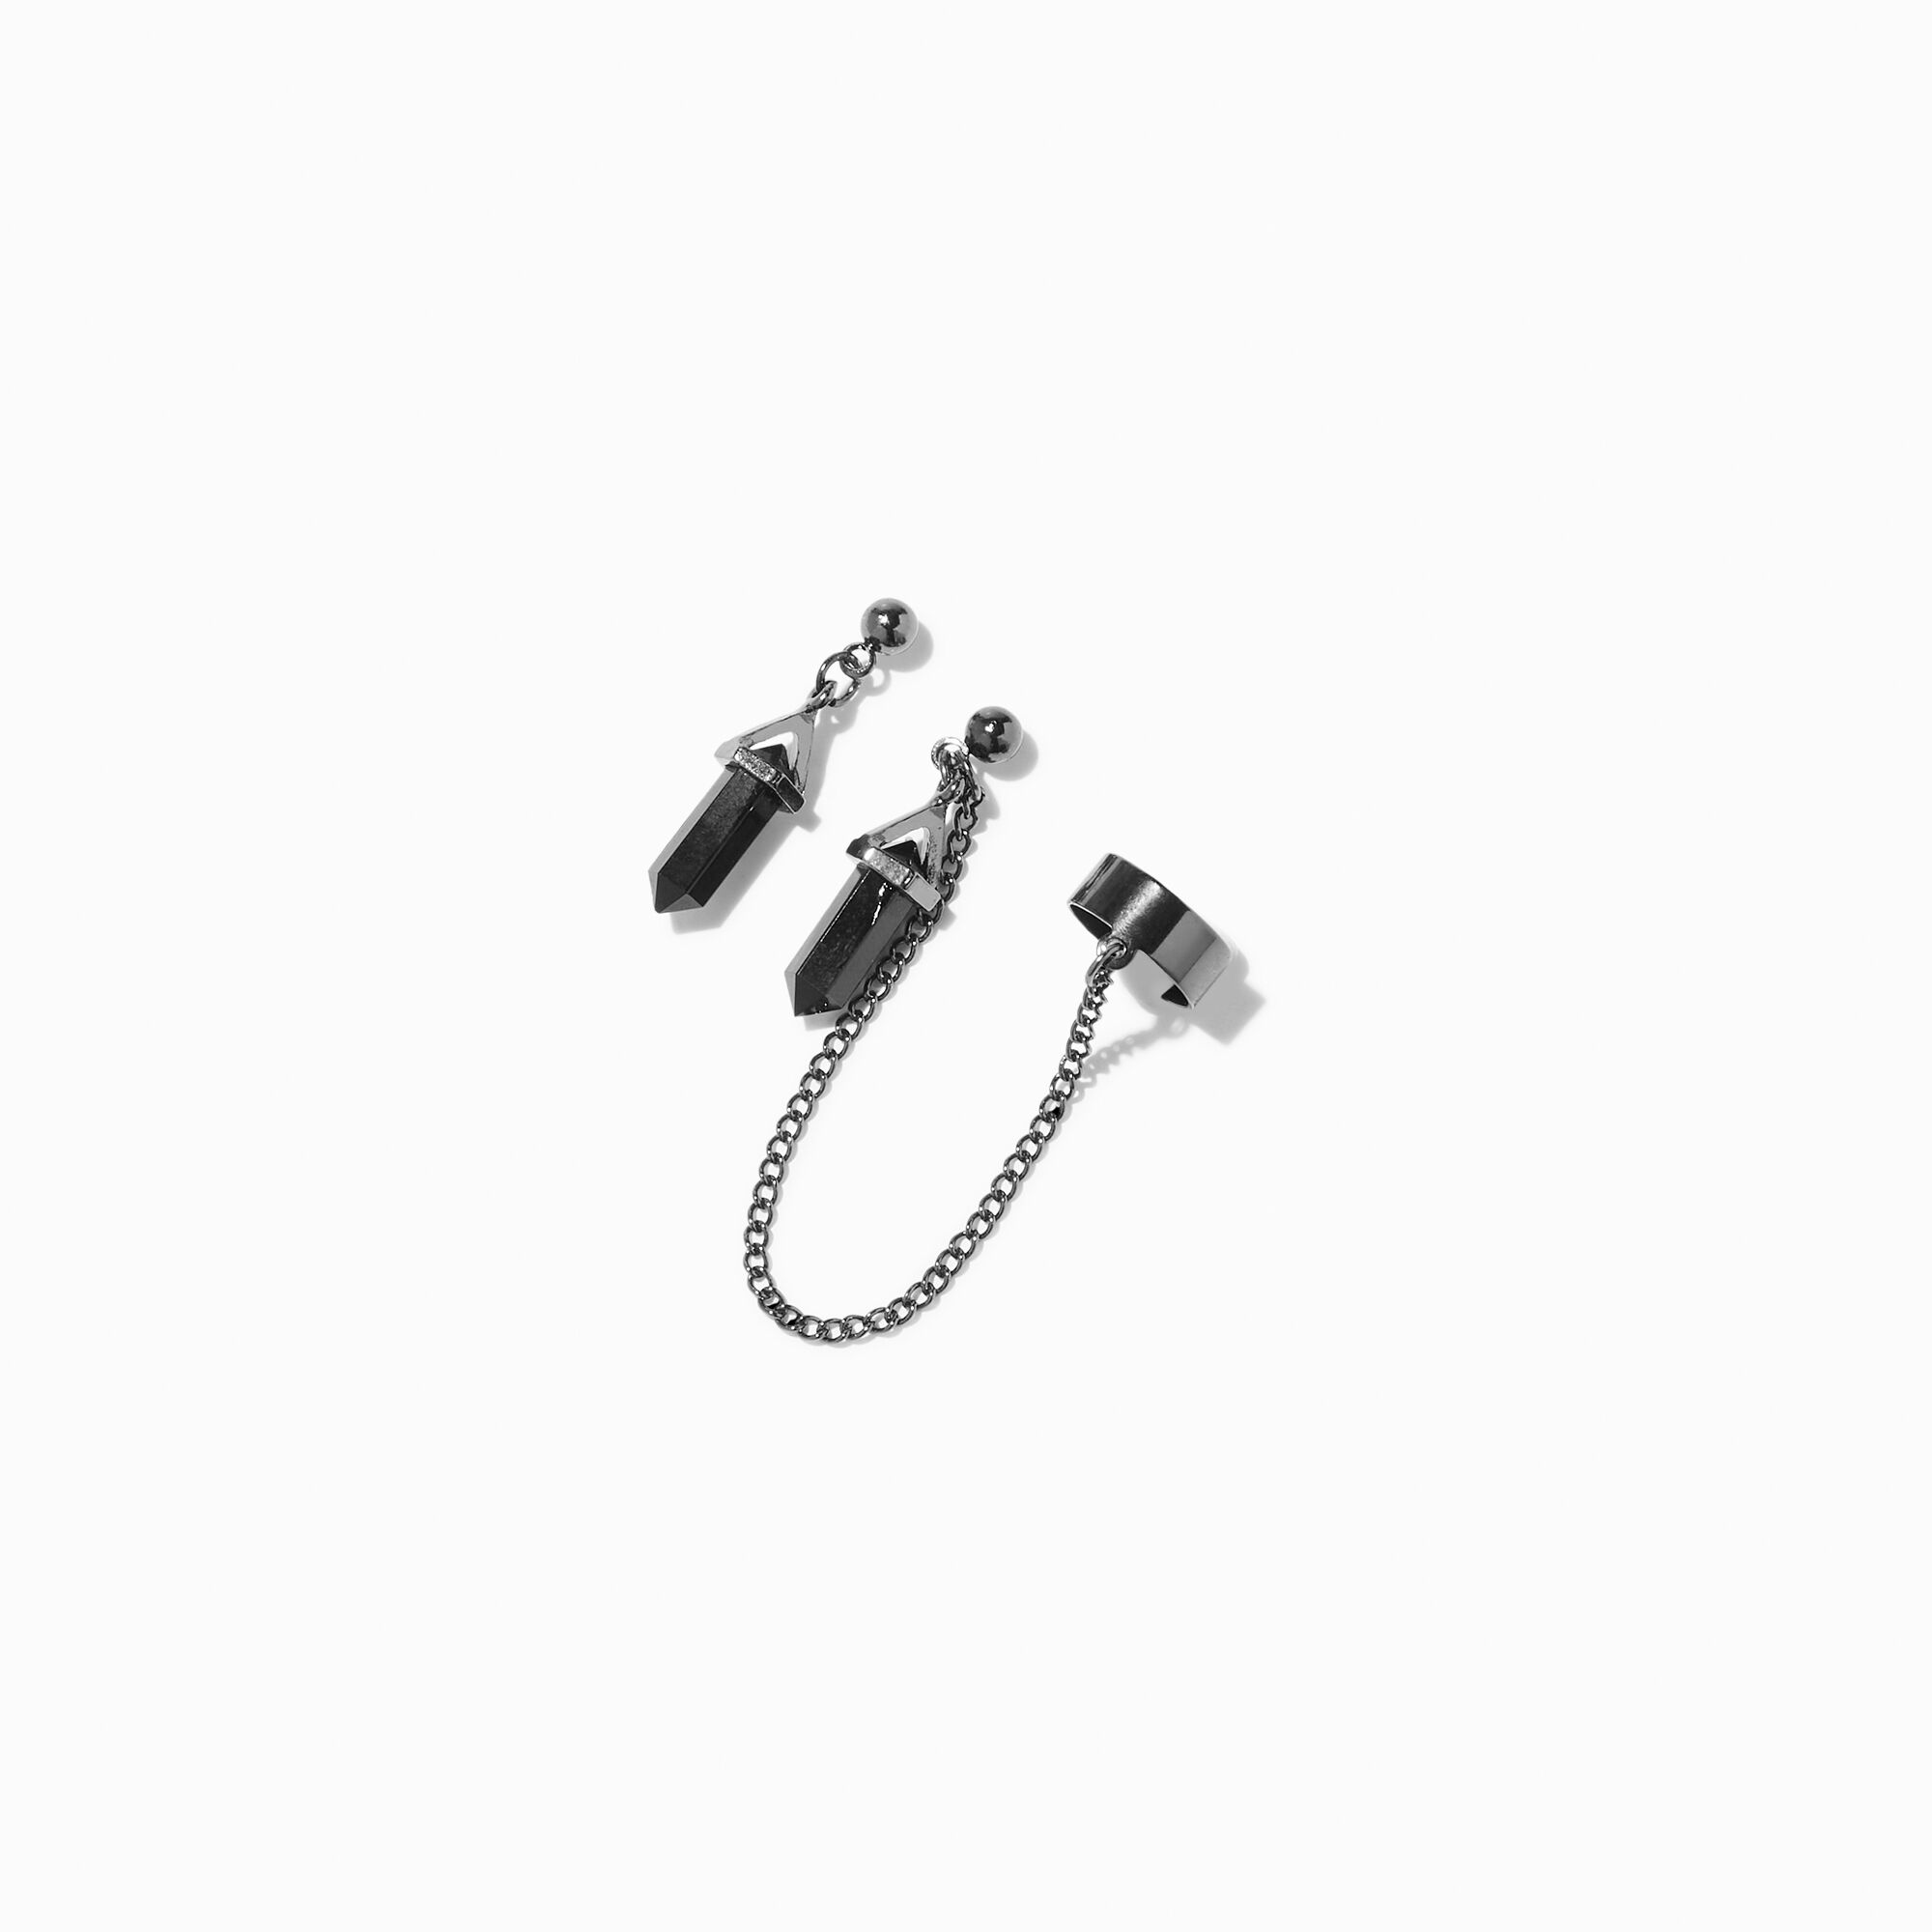 View Claires Hematite Mystical Gem Cuff Connector Drop Earrings Black information